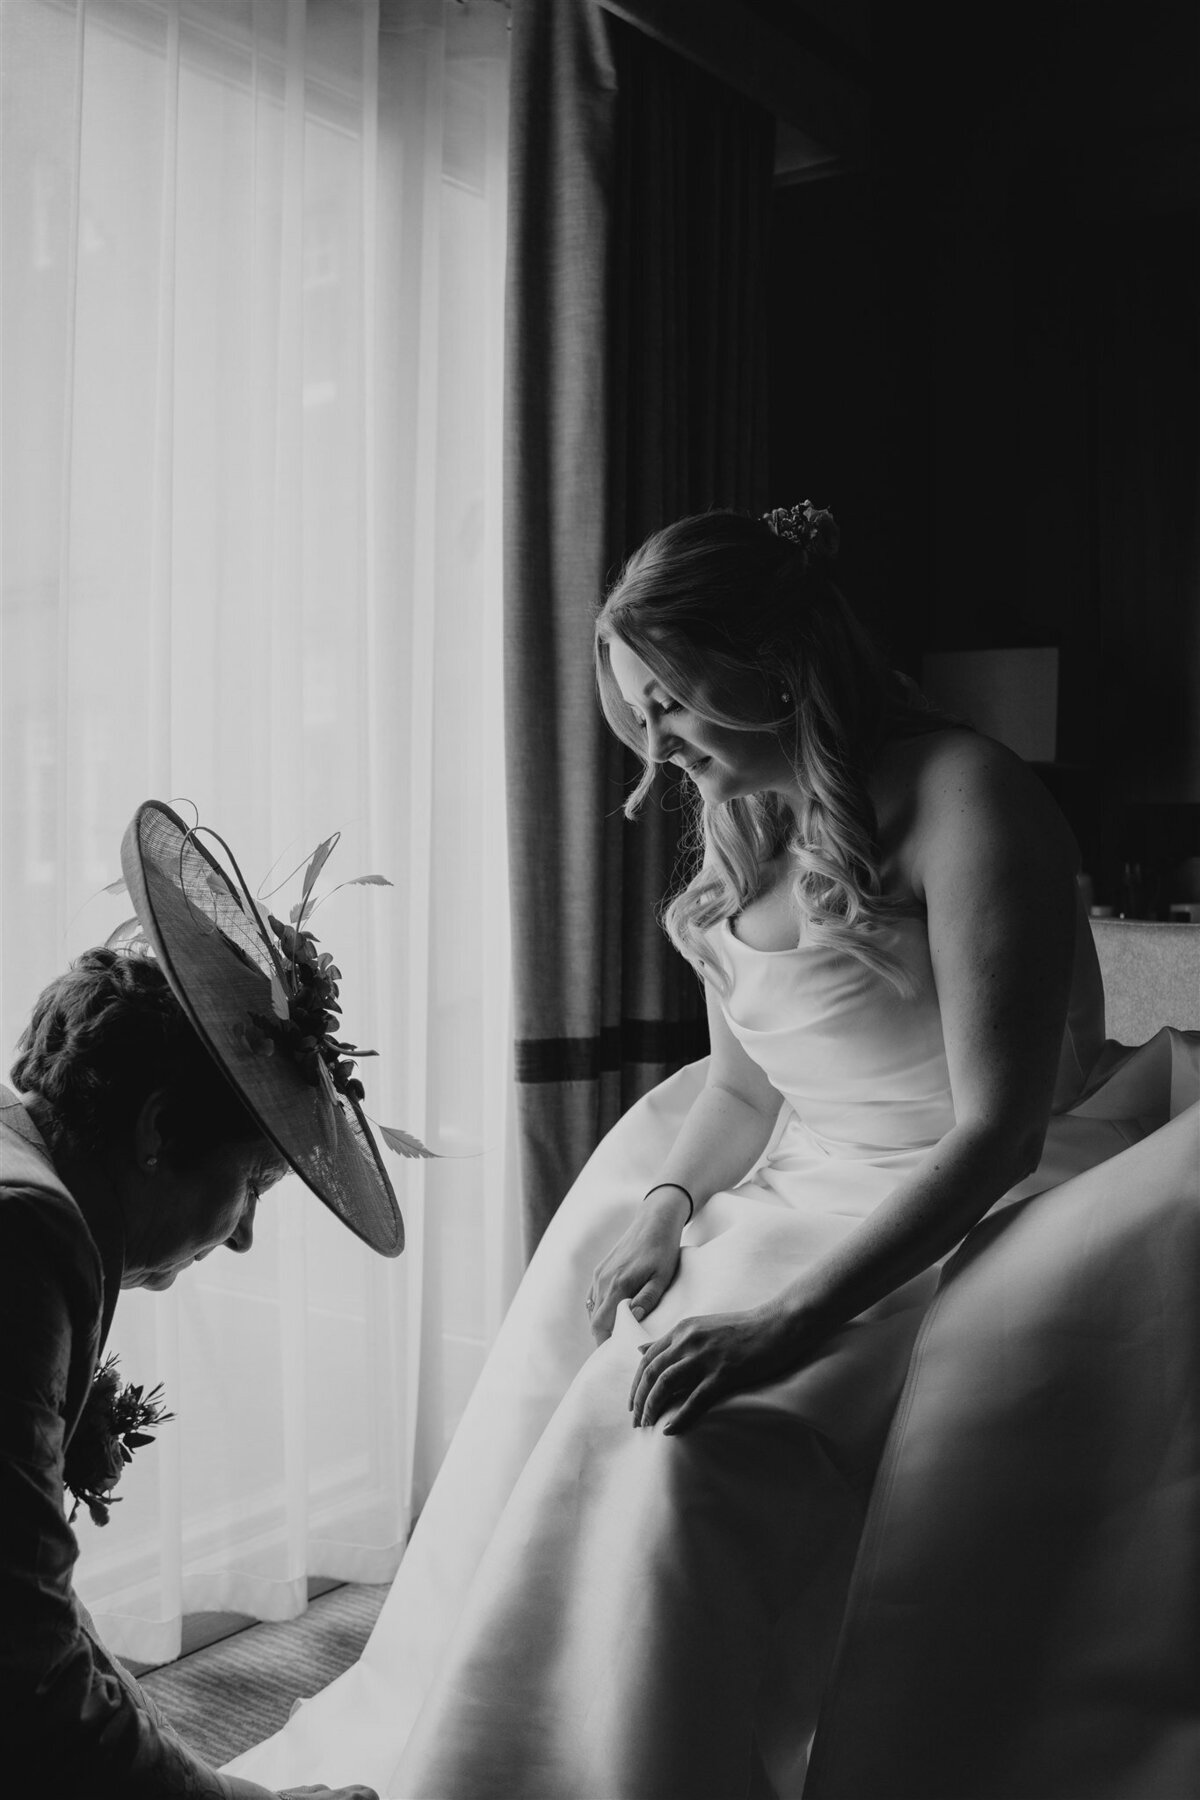 A bride gets ready for her wedding as her mum kneels down to fit her shoes.